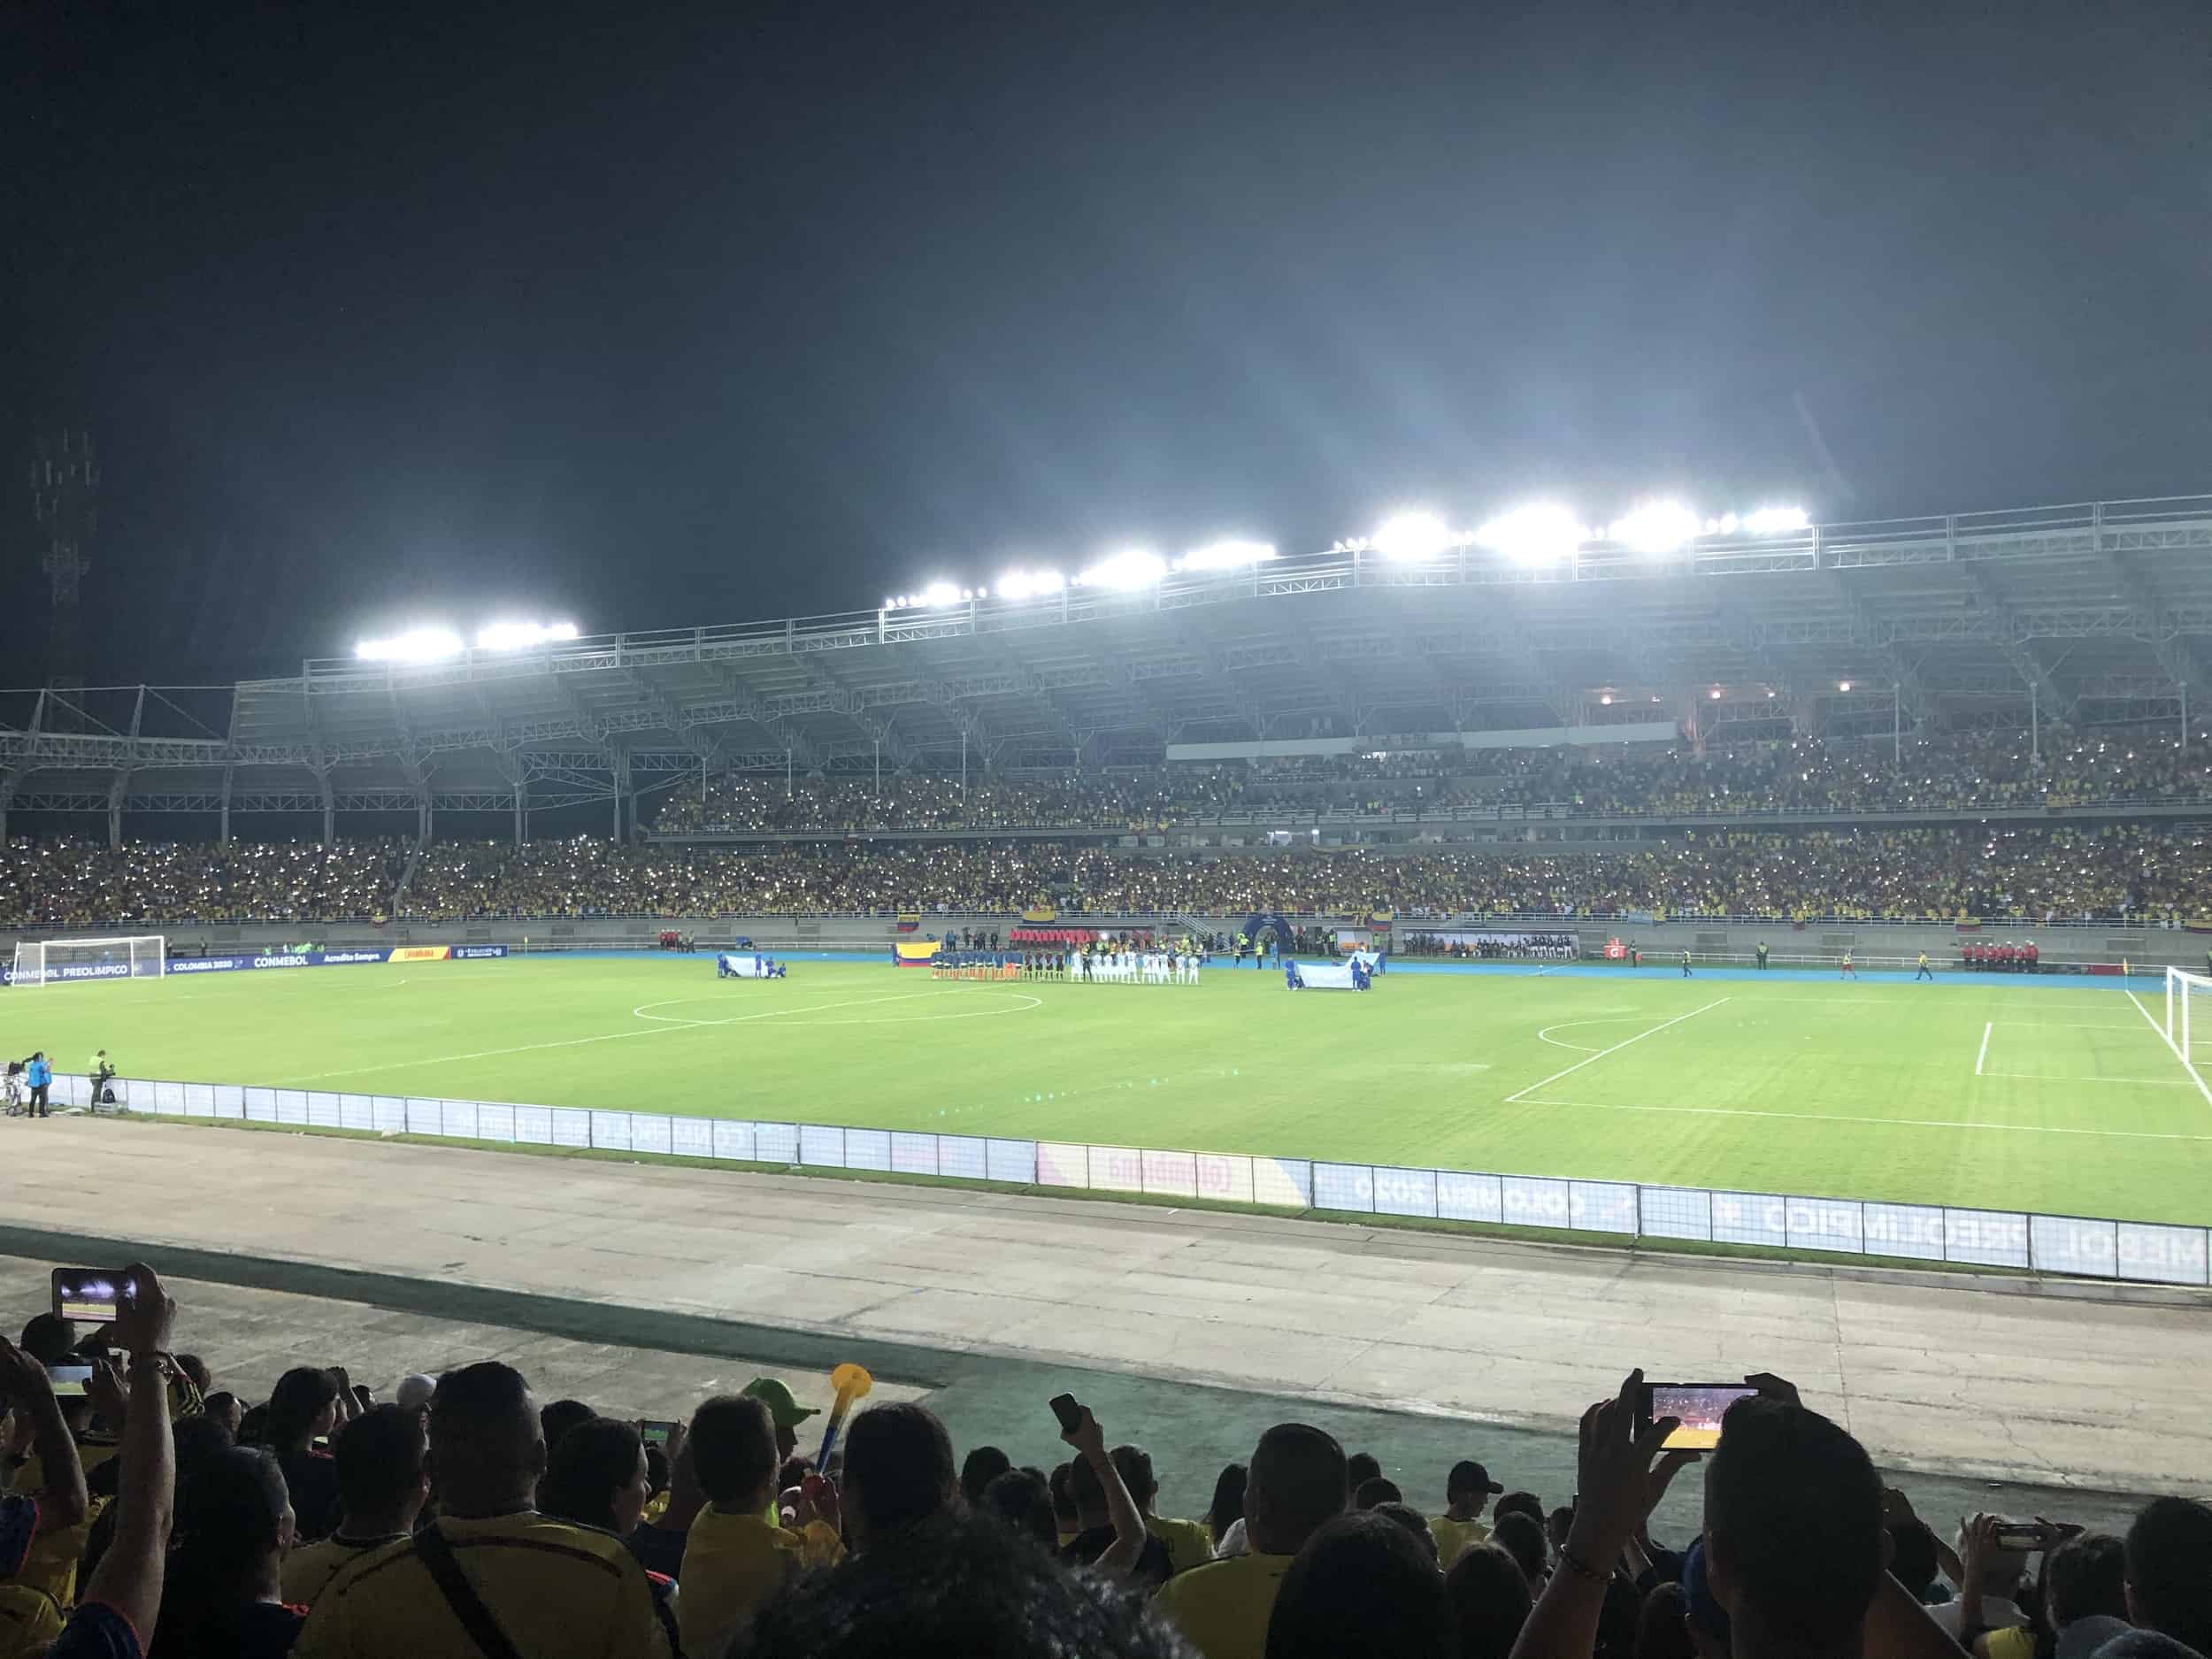 Colombia and Argentina lining up for the national anthems at the 2020 CONMEBOL Pre-Olympic Tournament in Pereira, Colombia